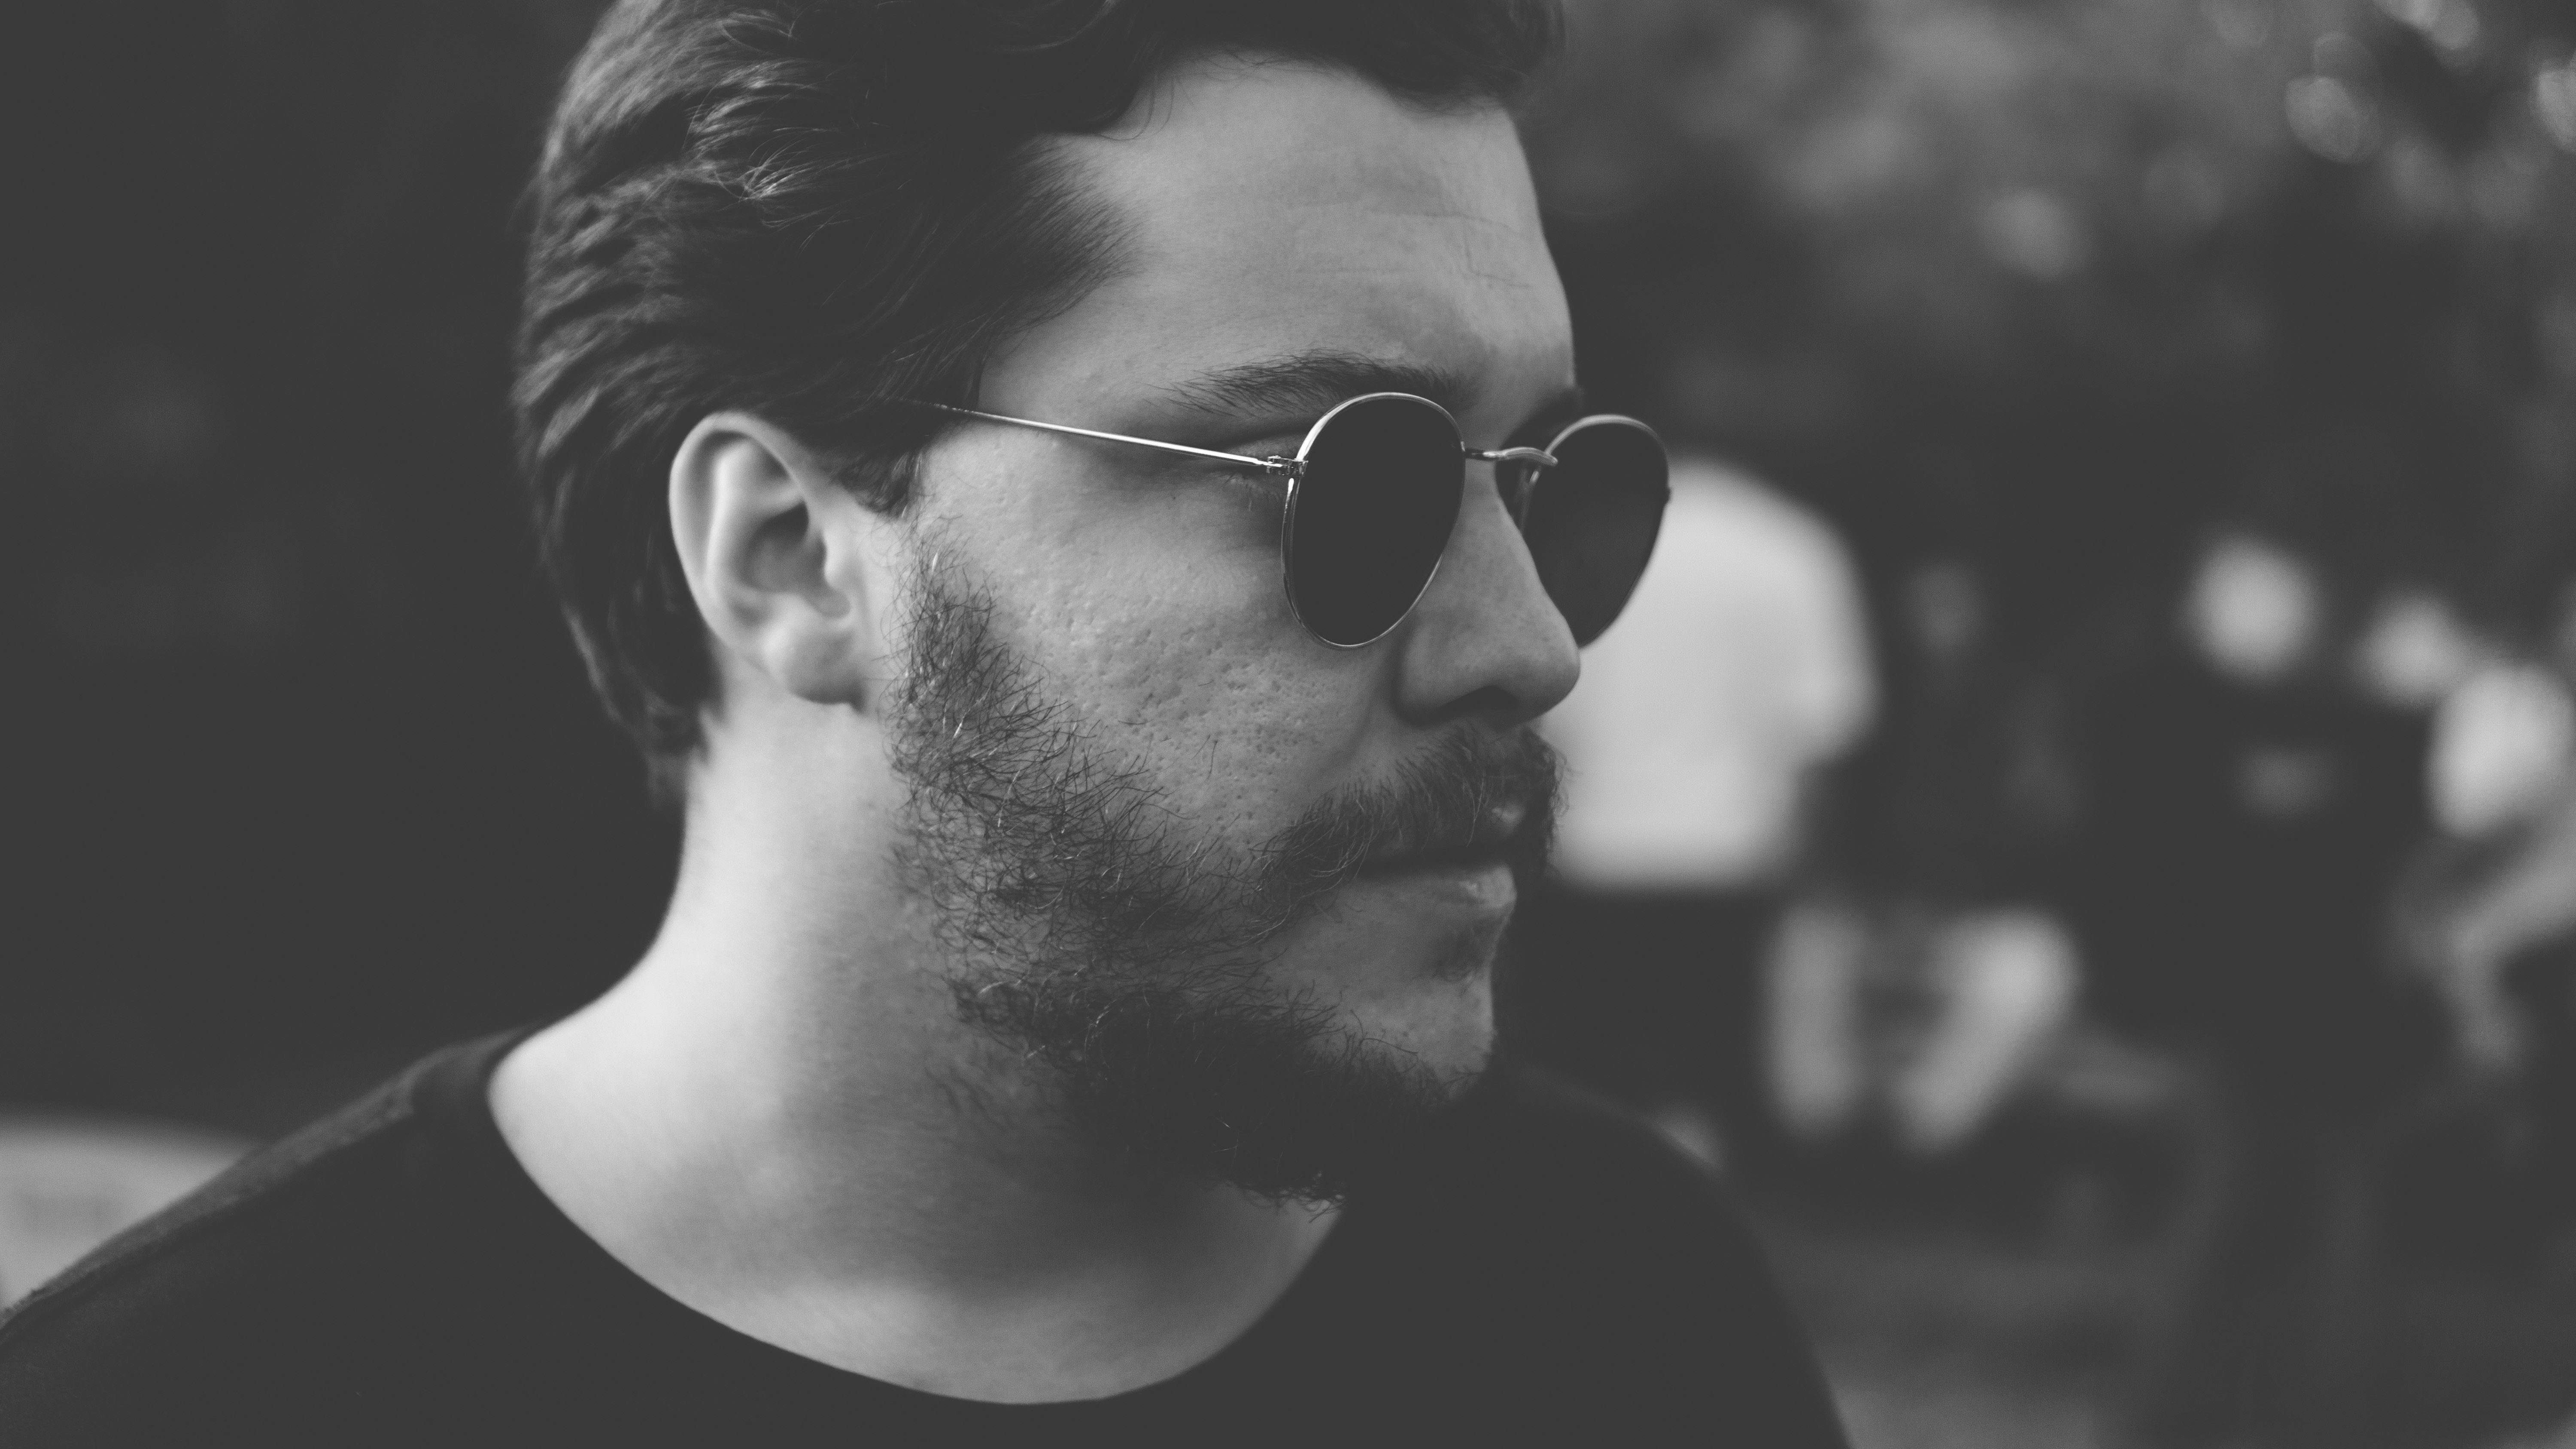 grayscale photography of man wearing sunglasses